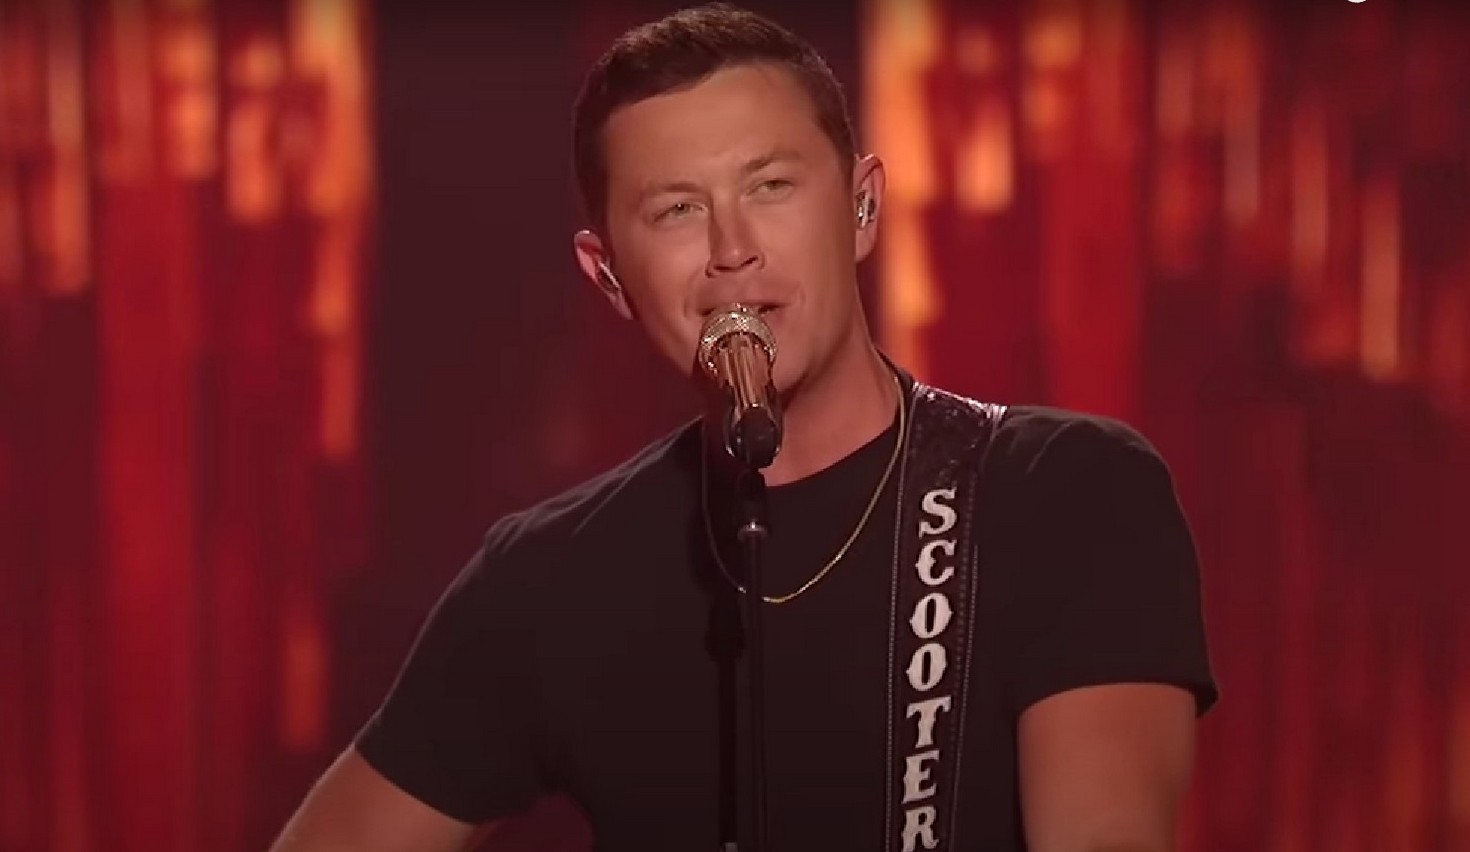 Scotty McCreery Named Finest Country Singer After This Live Performance